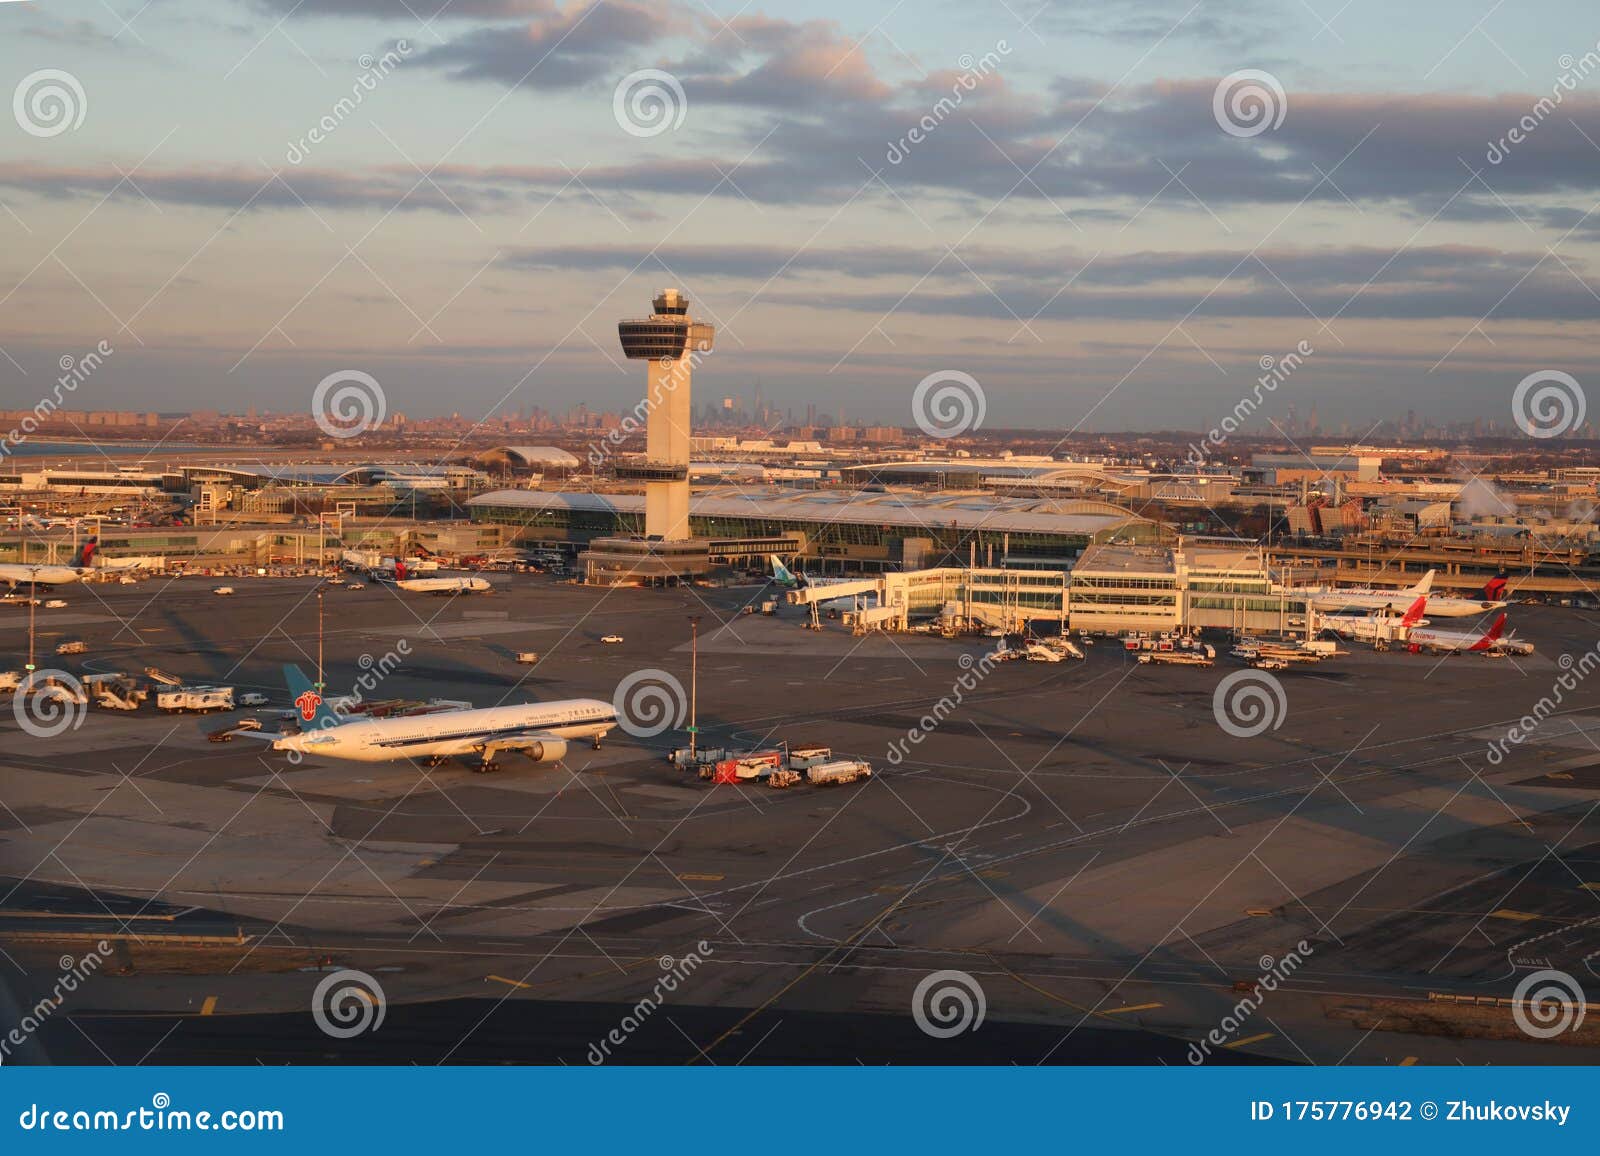 Aerial View Of Air Traffic Control Tower And Terminal 4 At Jfk